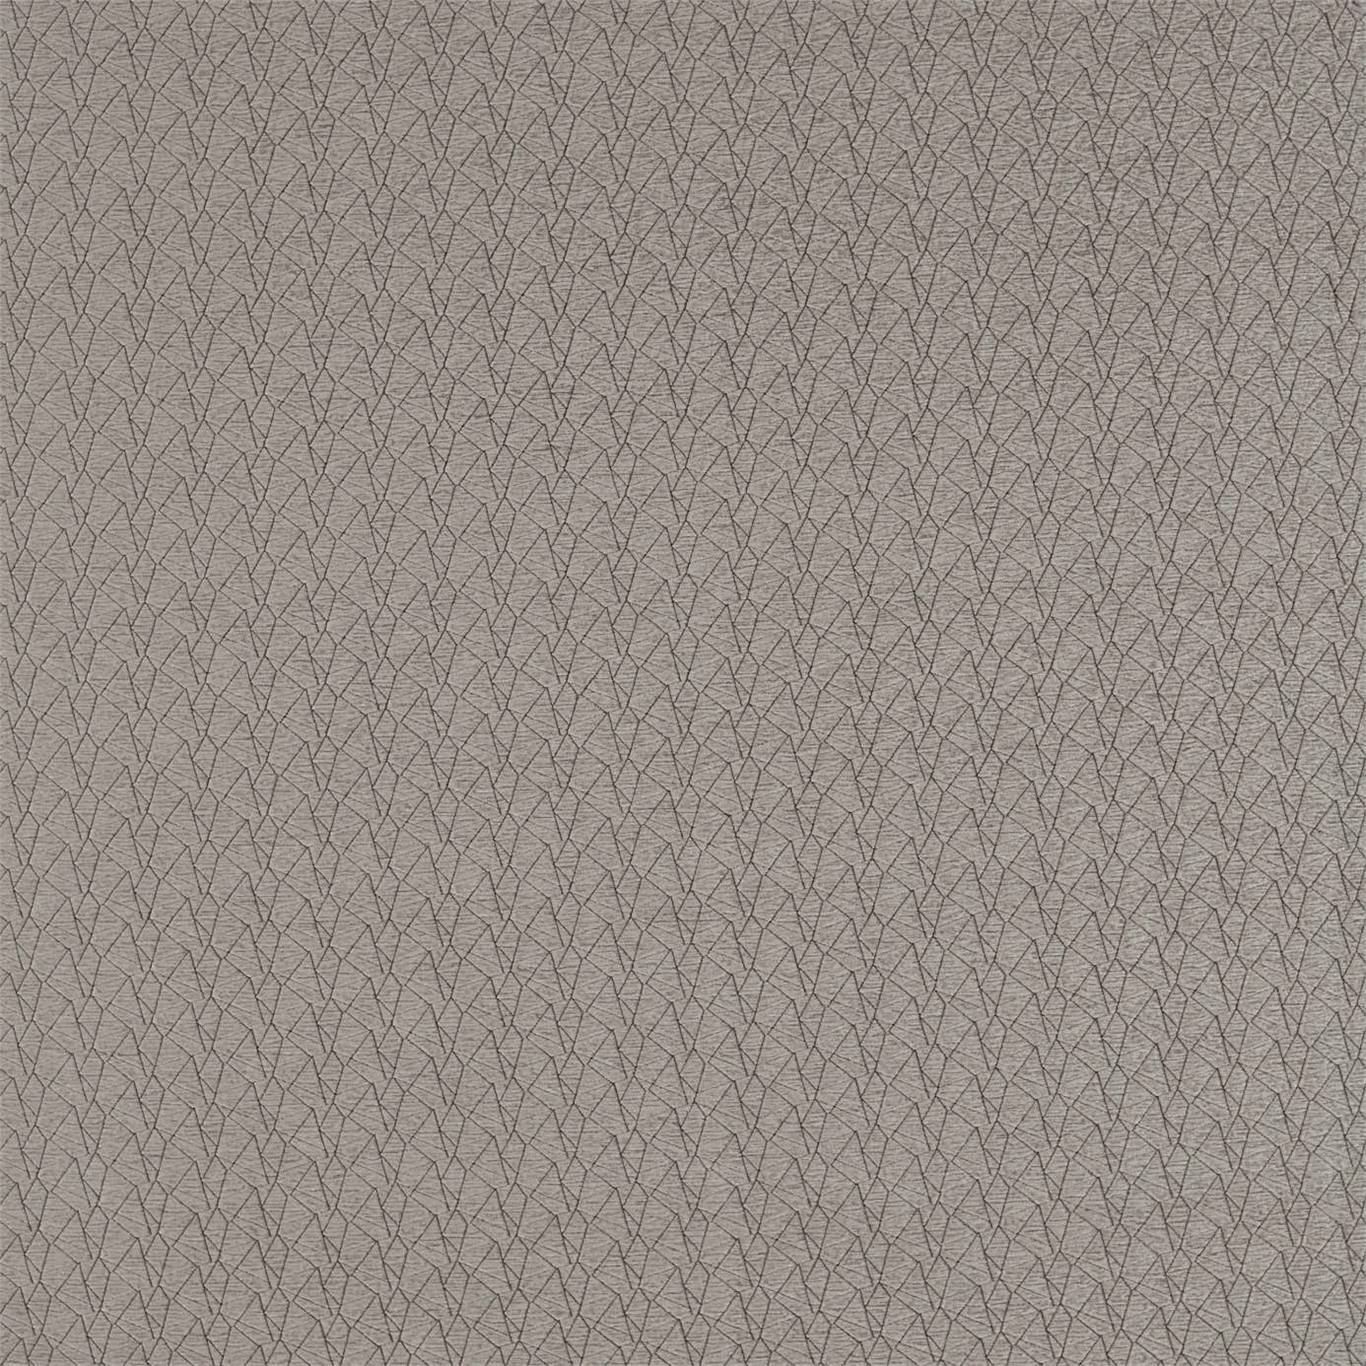 Tectrix Pewter Fabric by HAR